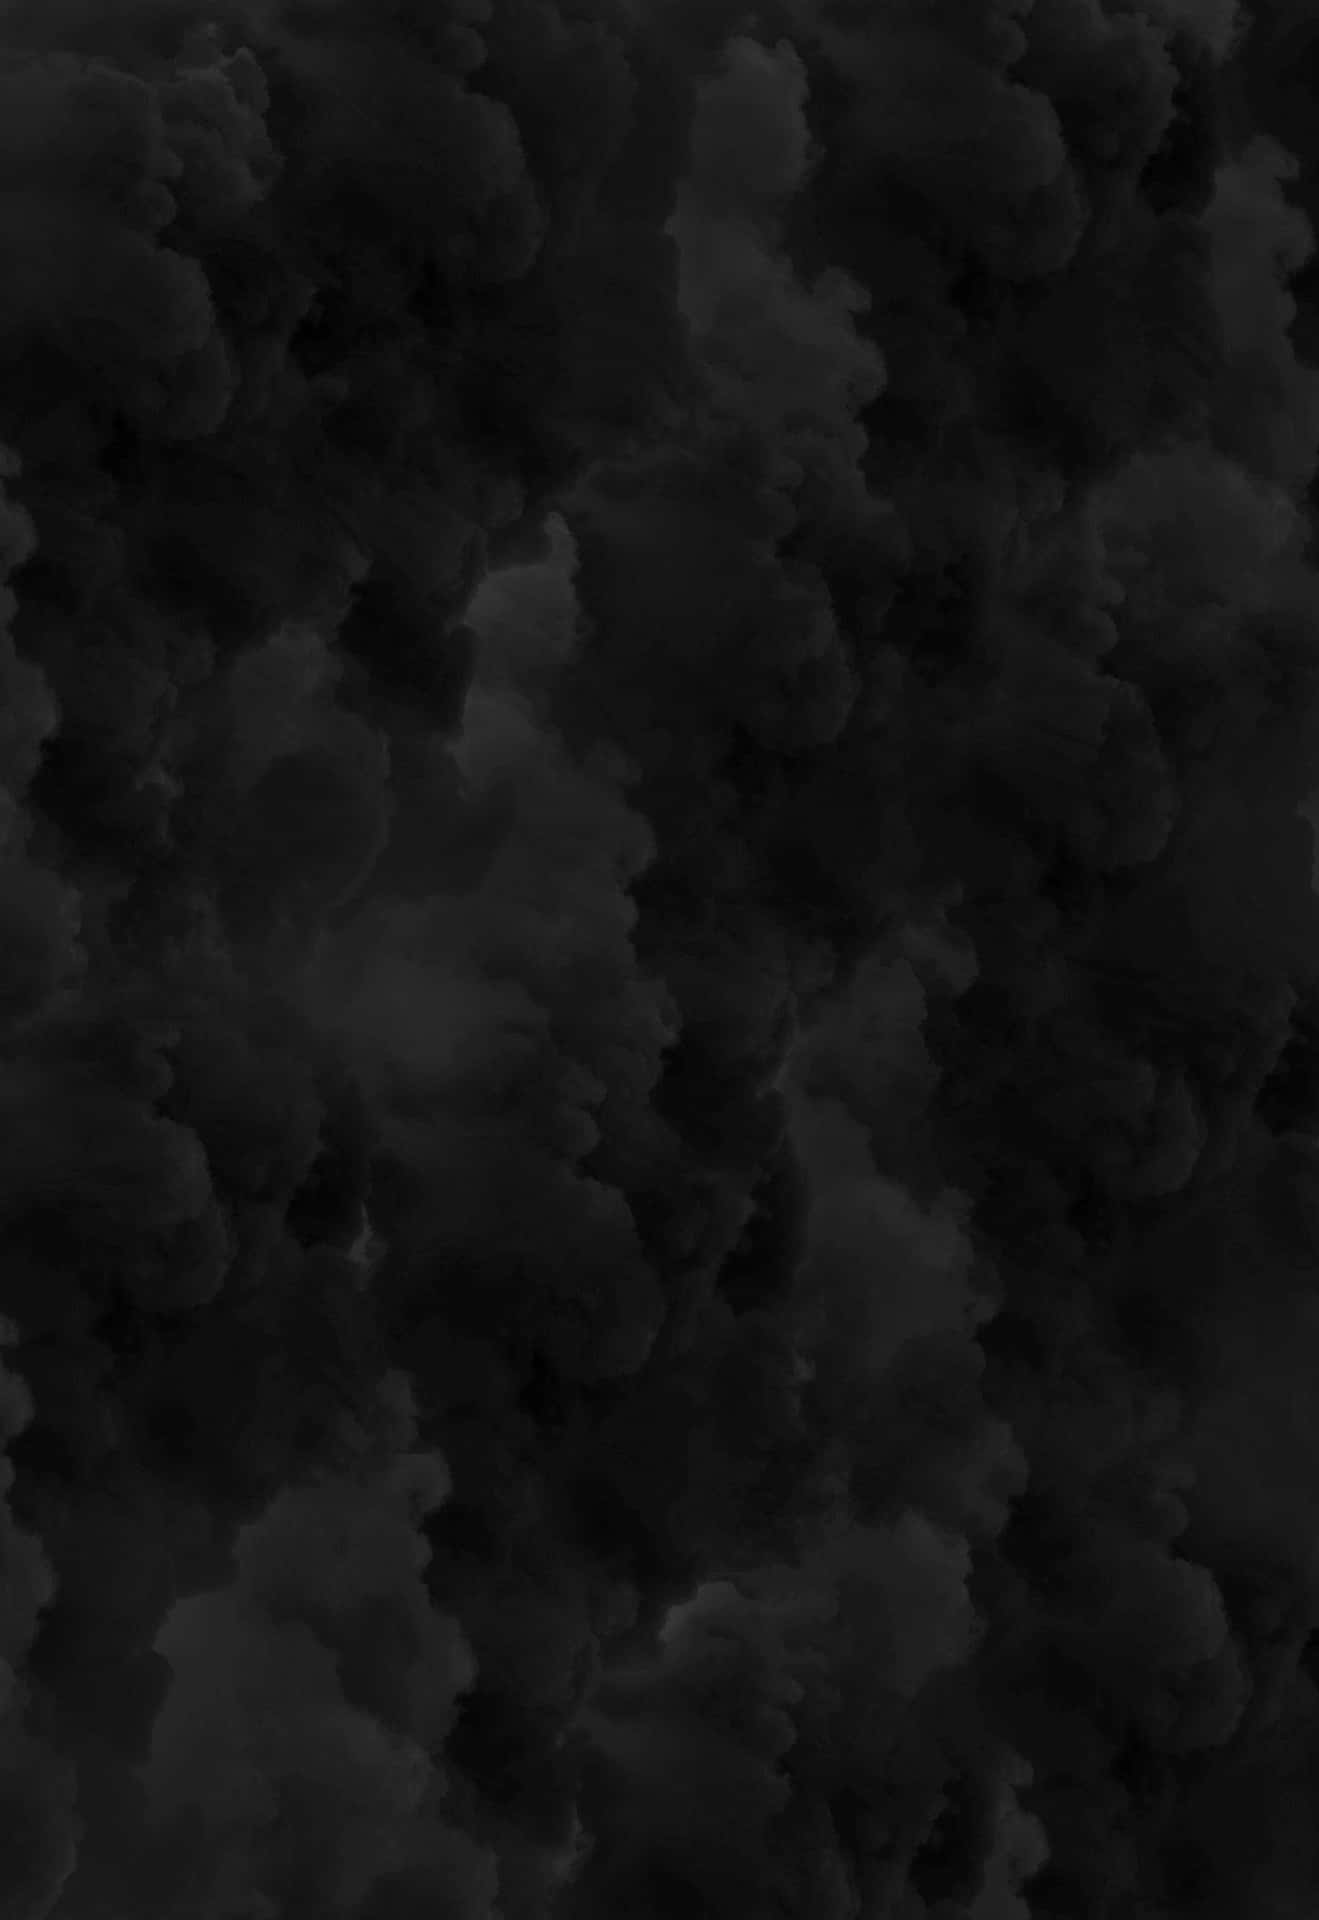 Foreboding Black Clouds Wallpaper